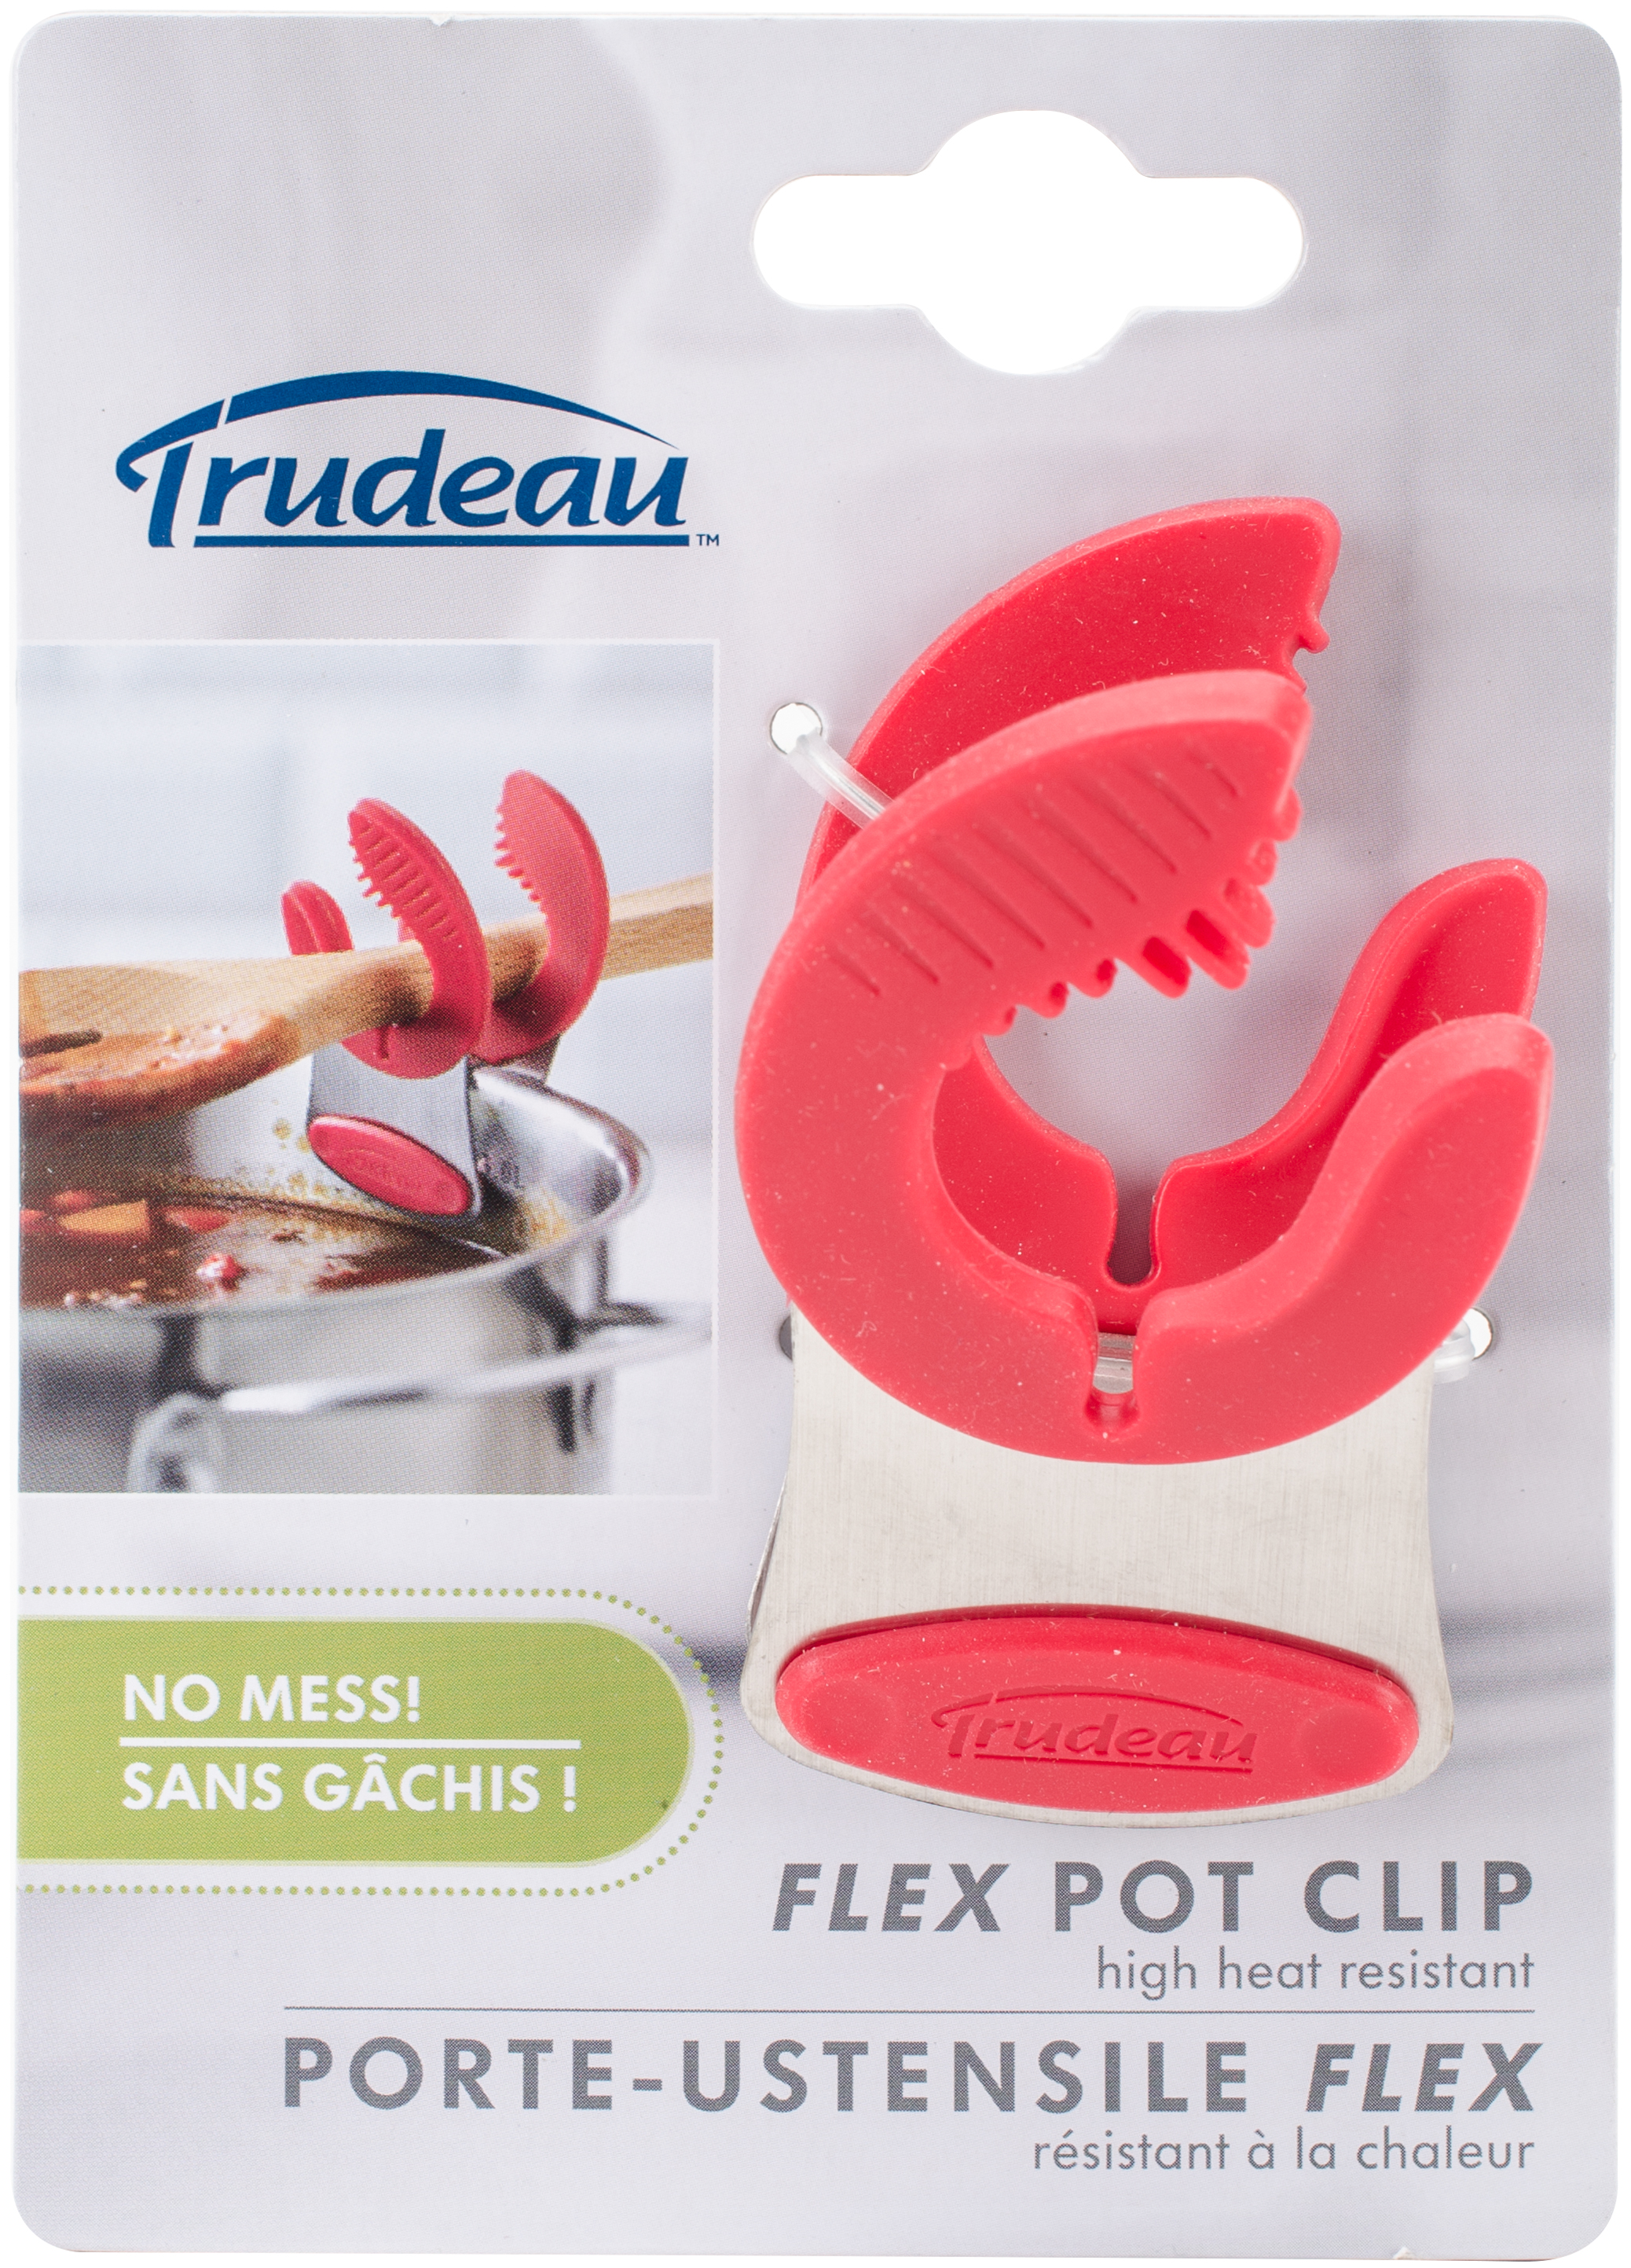 2 Pack Trudeau Stainless Steel Flex Pot Clip-Red 09912086